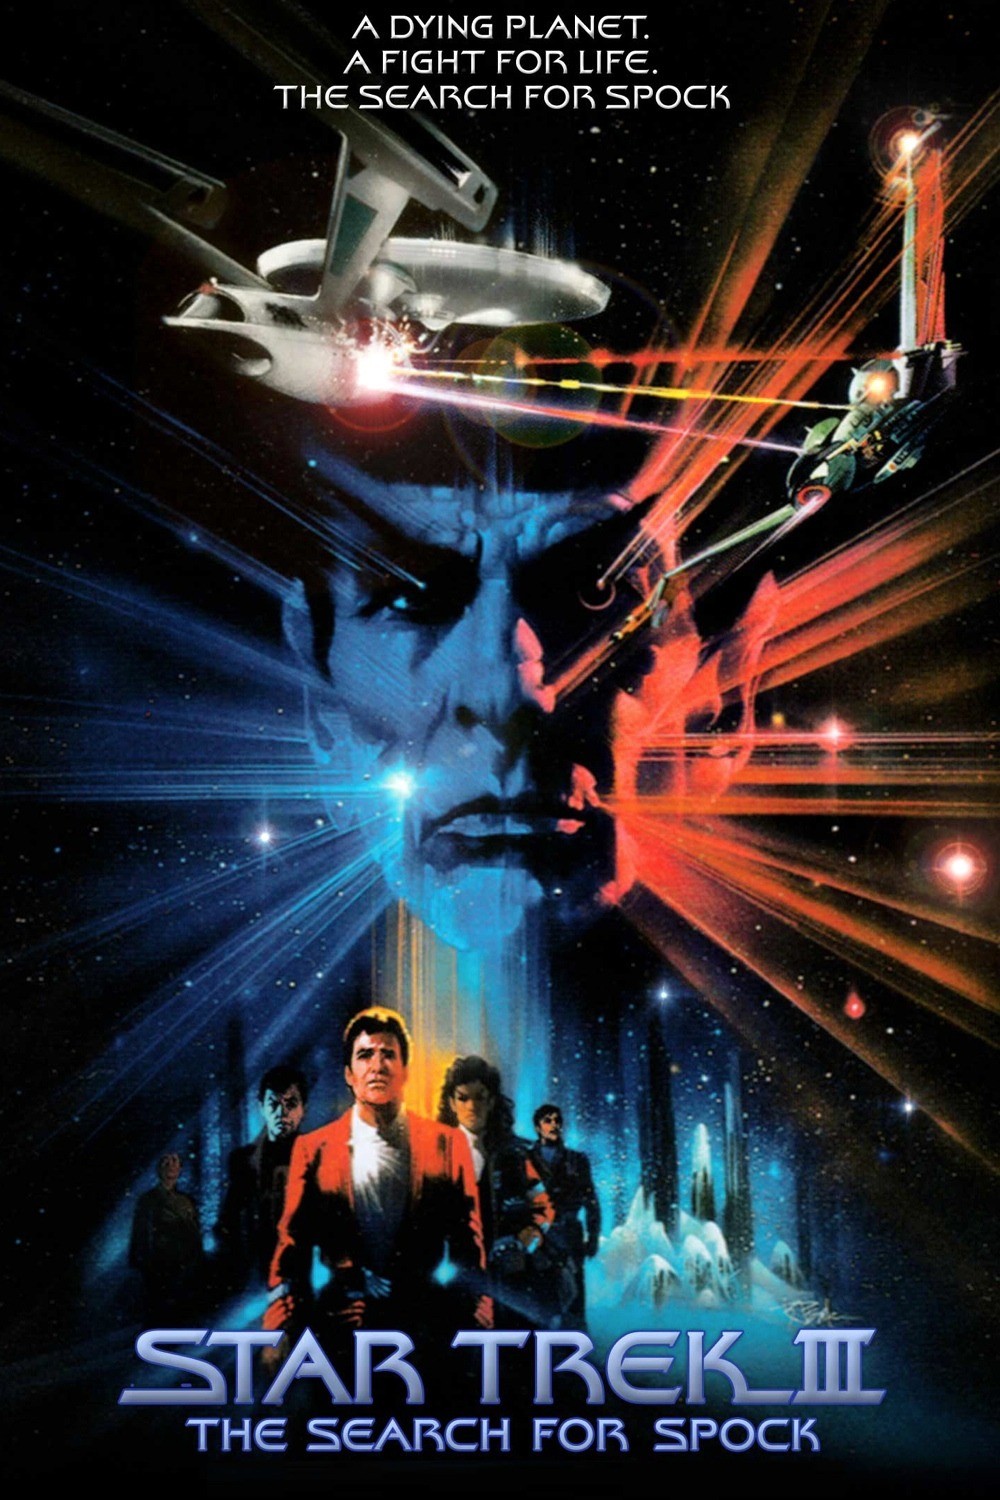 Star Trek Iii The Search For Spock